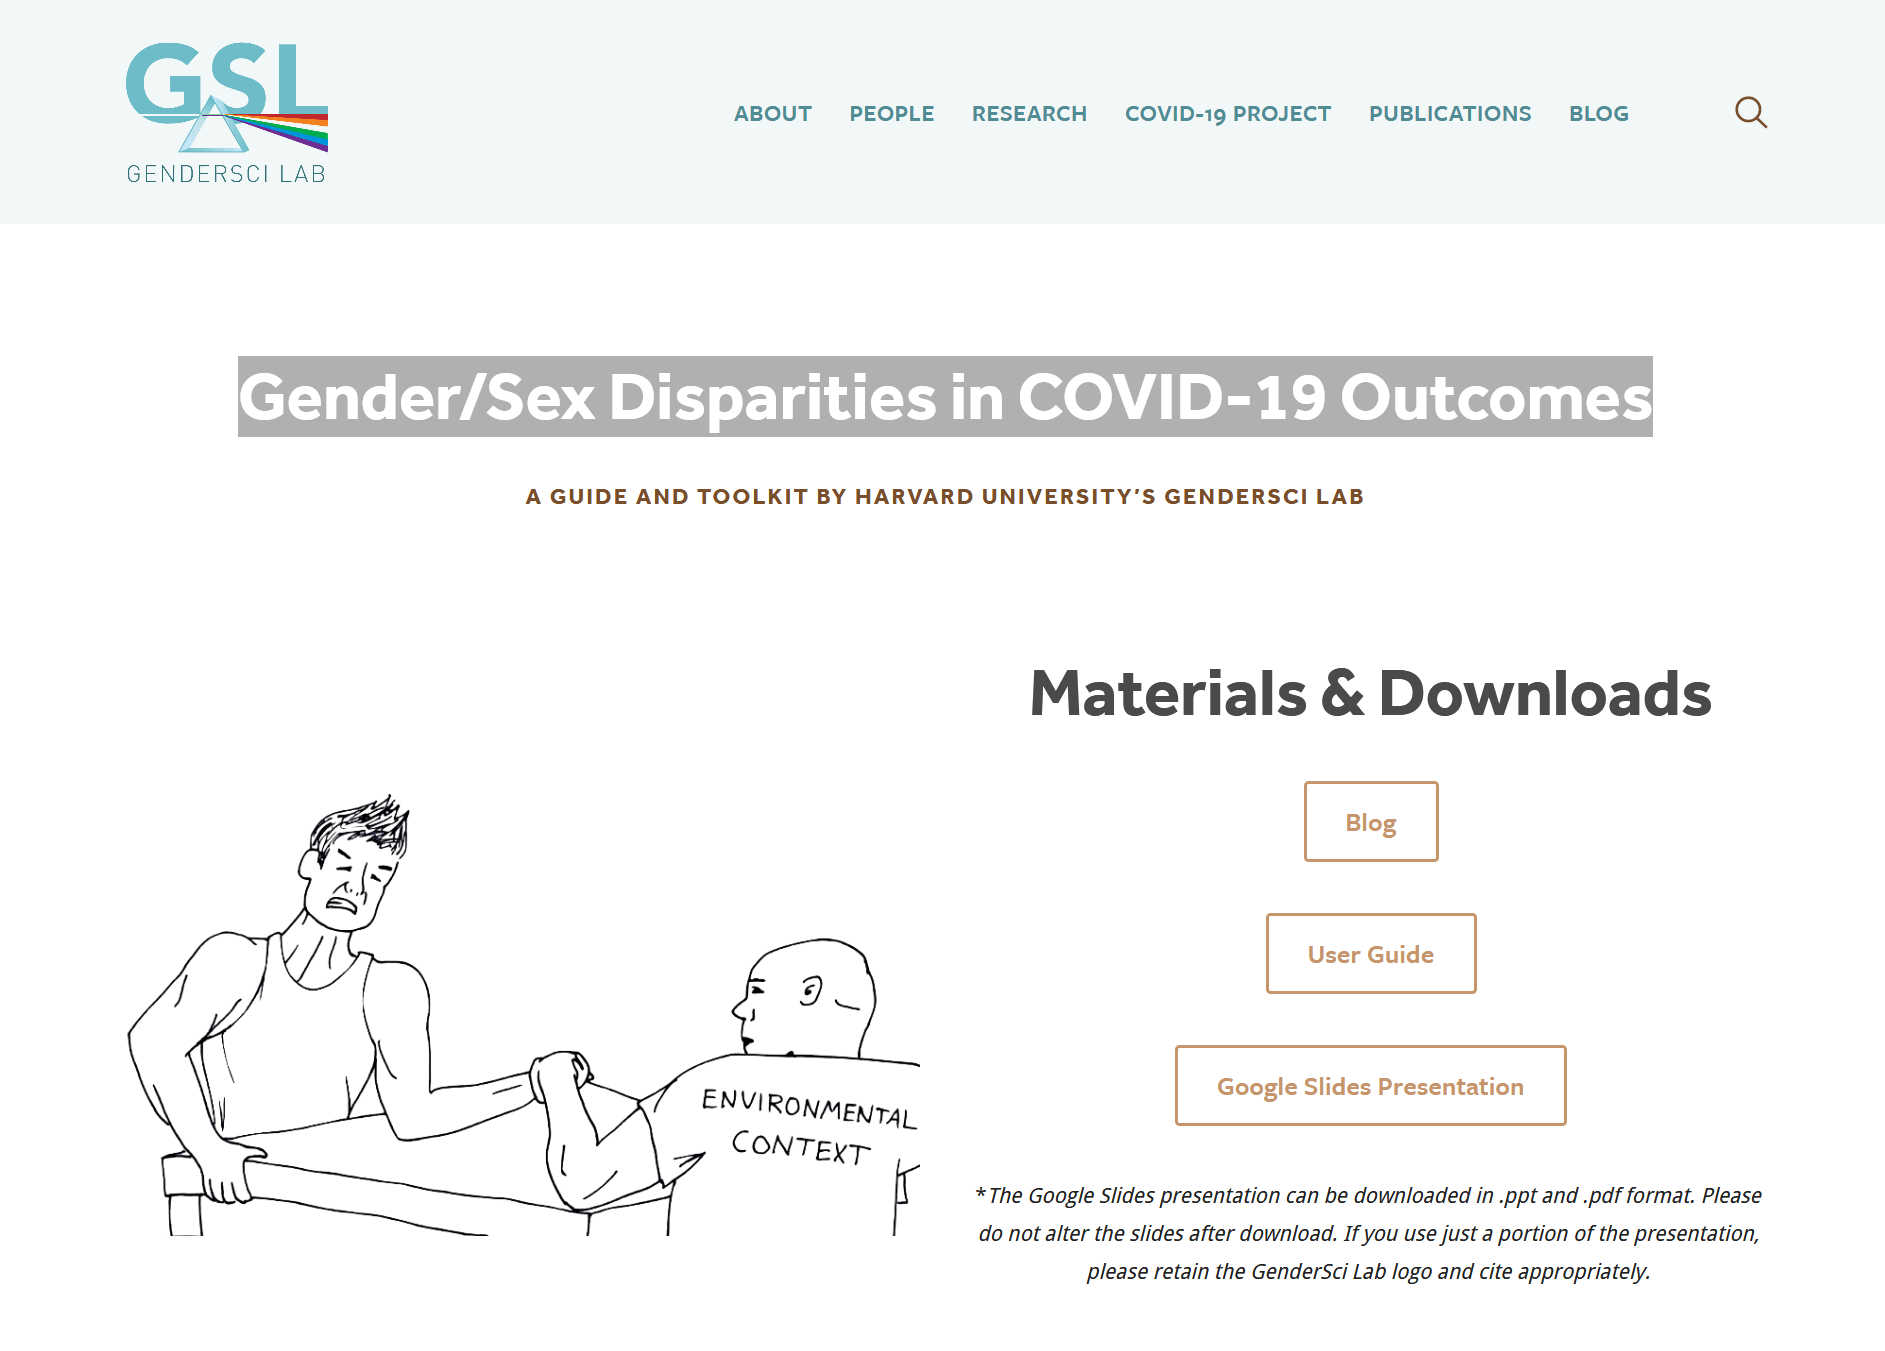 Gender/sex disparities in COVID-19 outcomes: A guide and toolkit by Harvard University’s GenderSci Lab